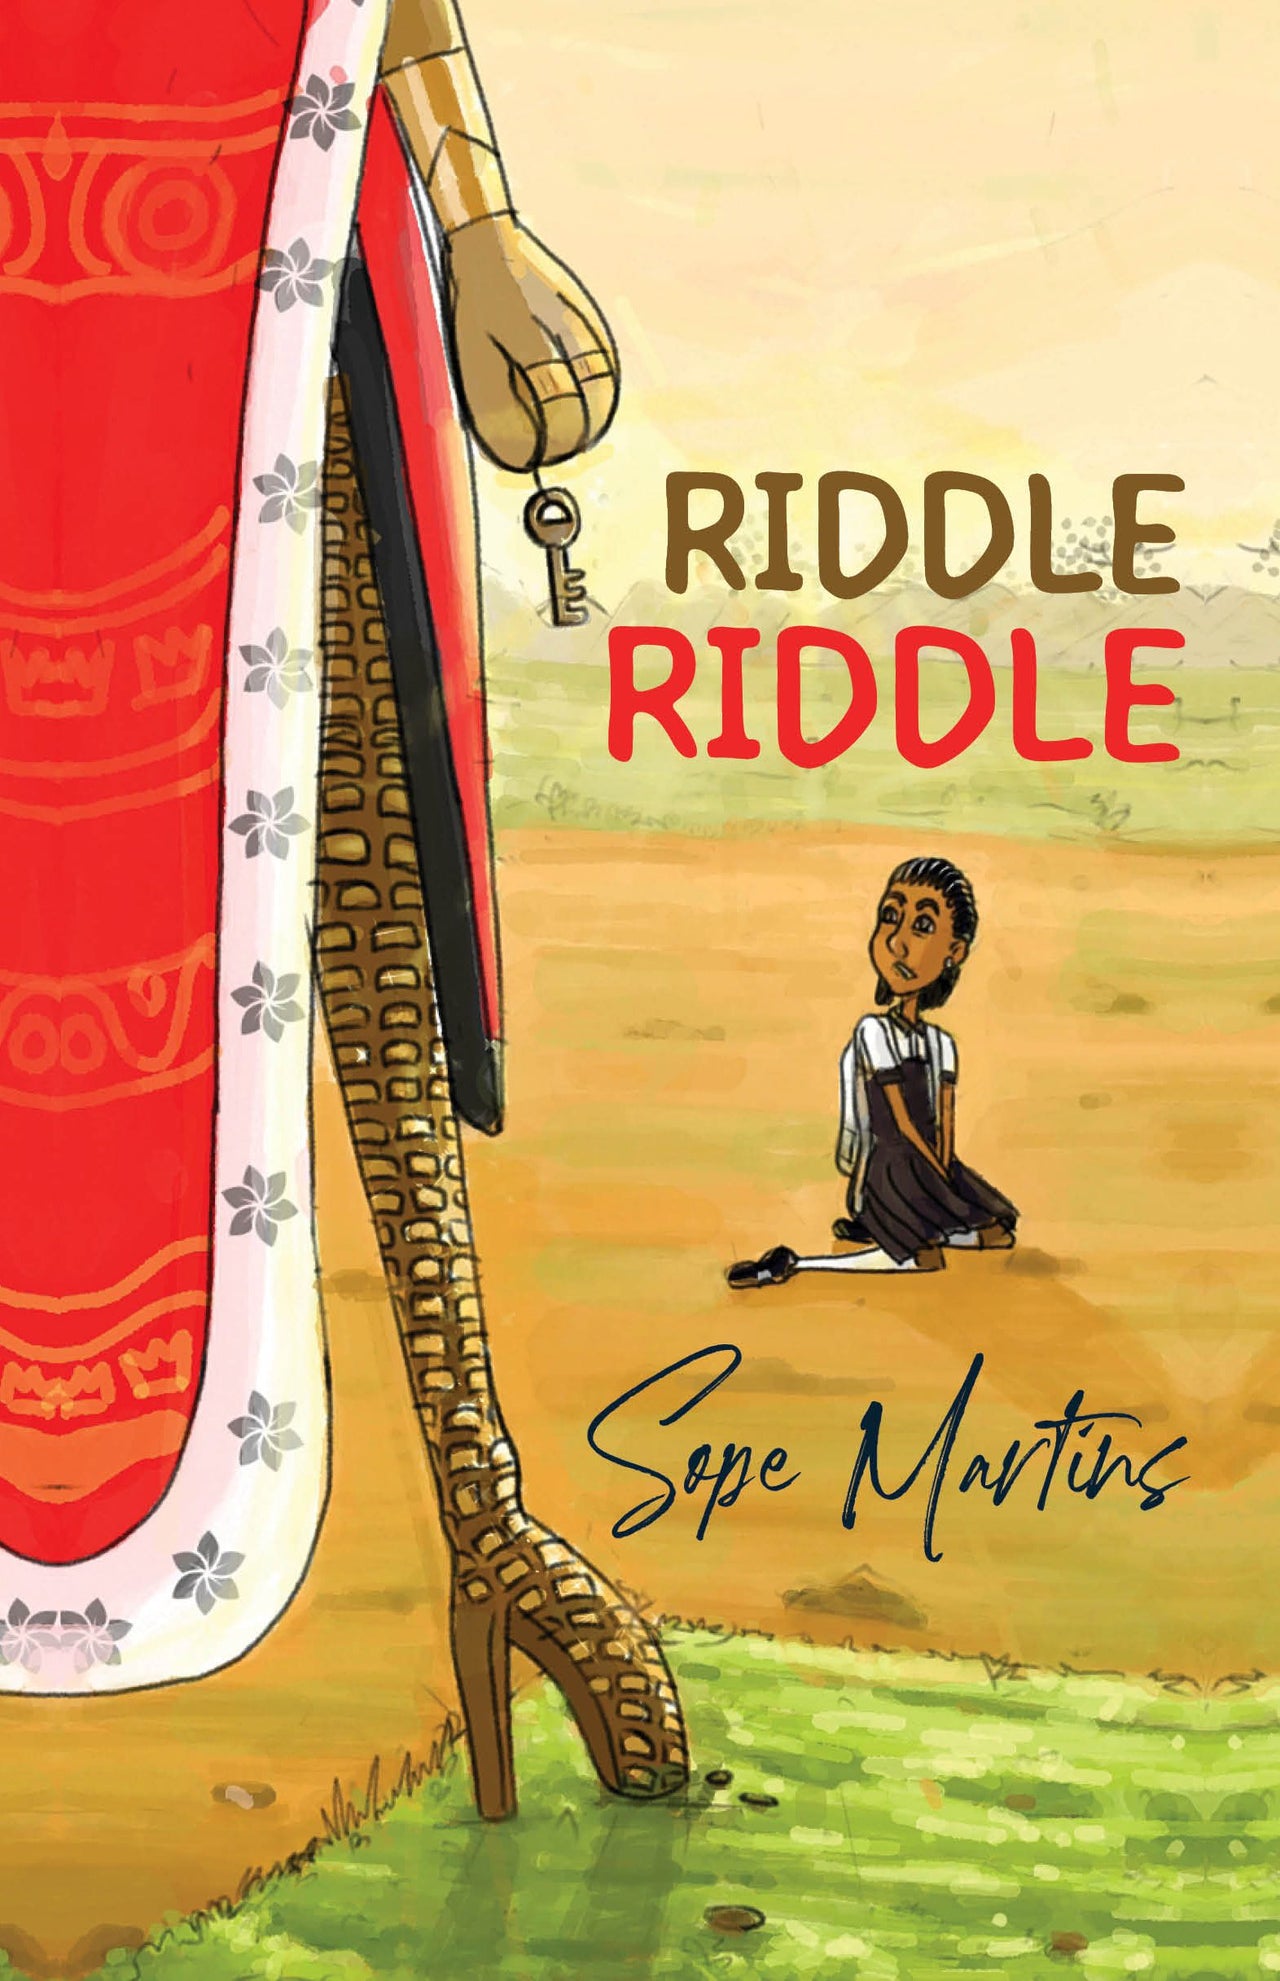 Riddle Riddle by Sope Martins Master Kids Company  